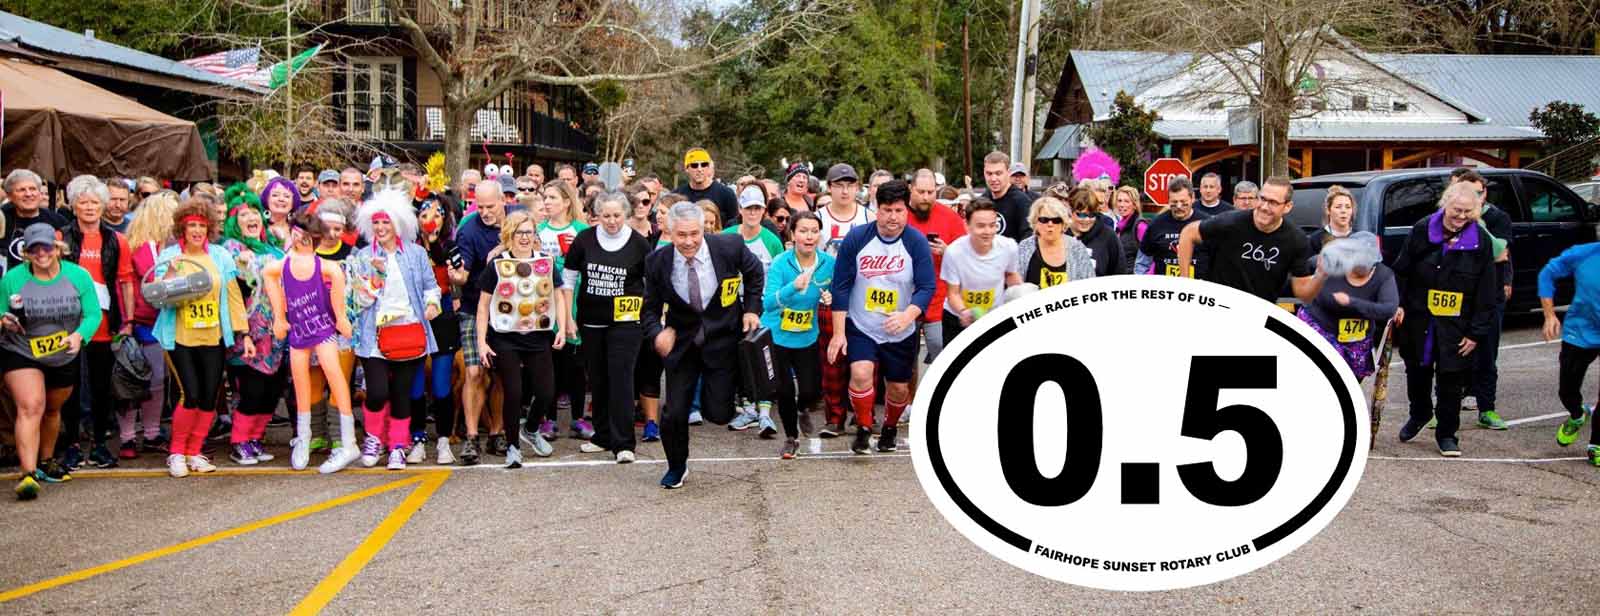 Fairhope Sunset Rotary Club Race For Charity